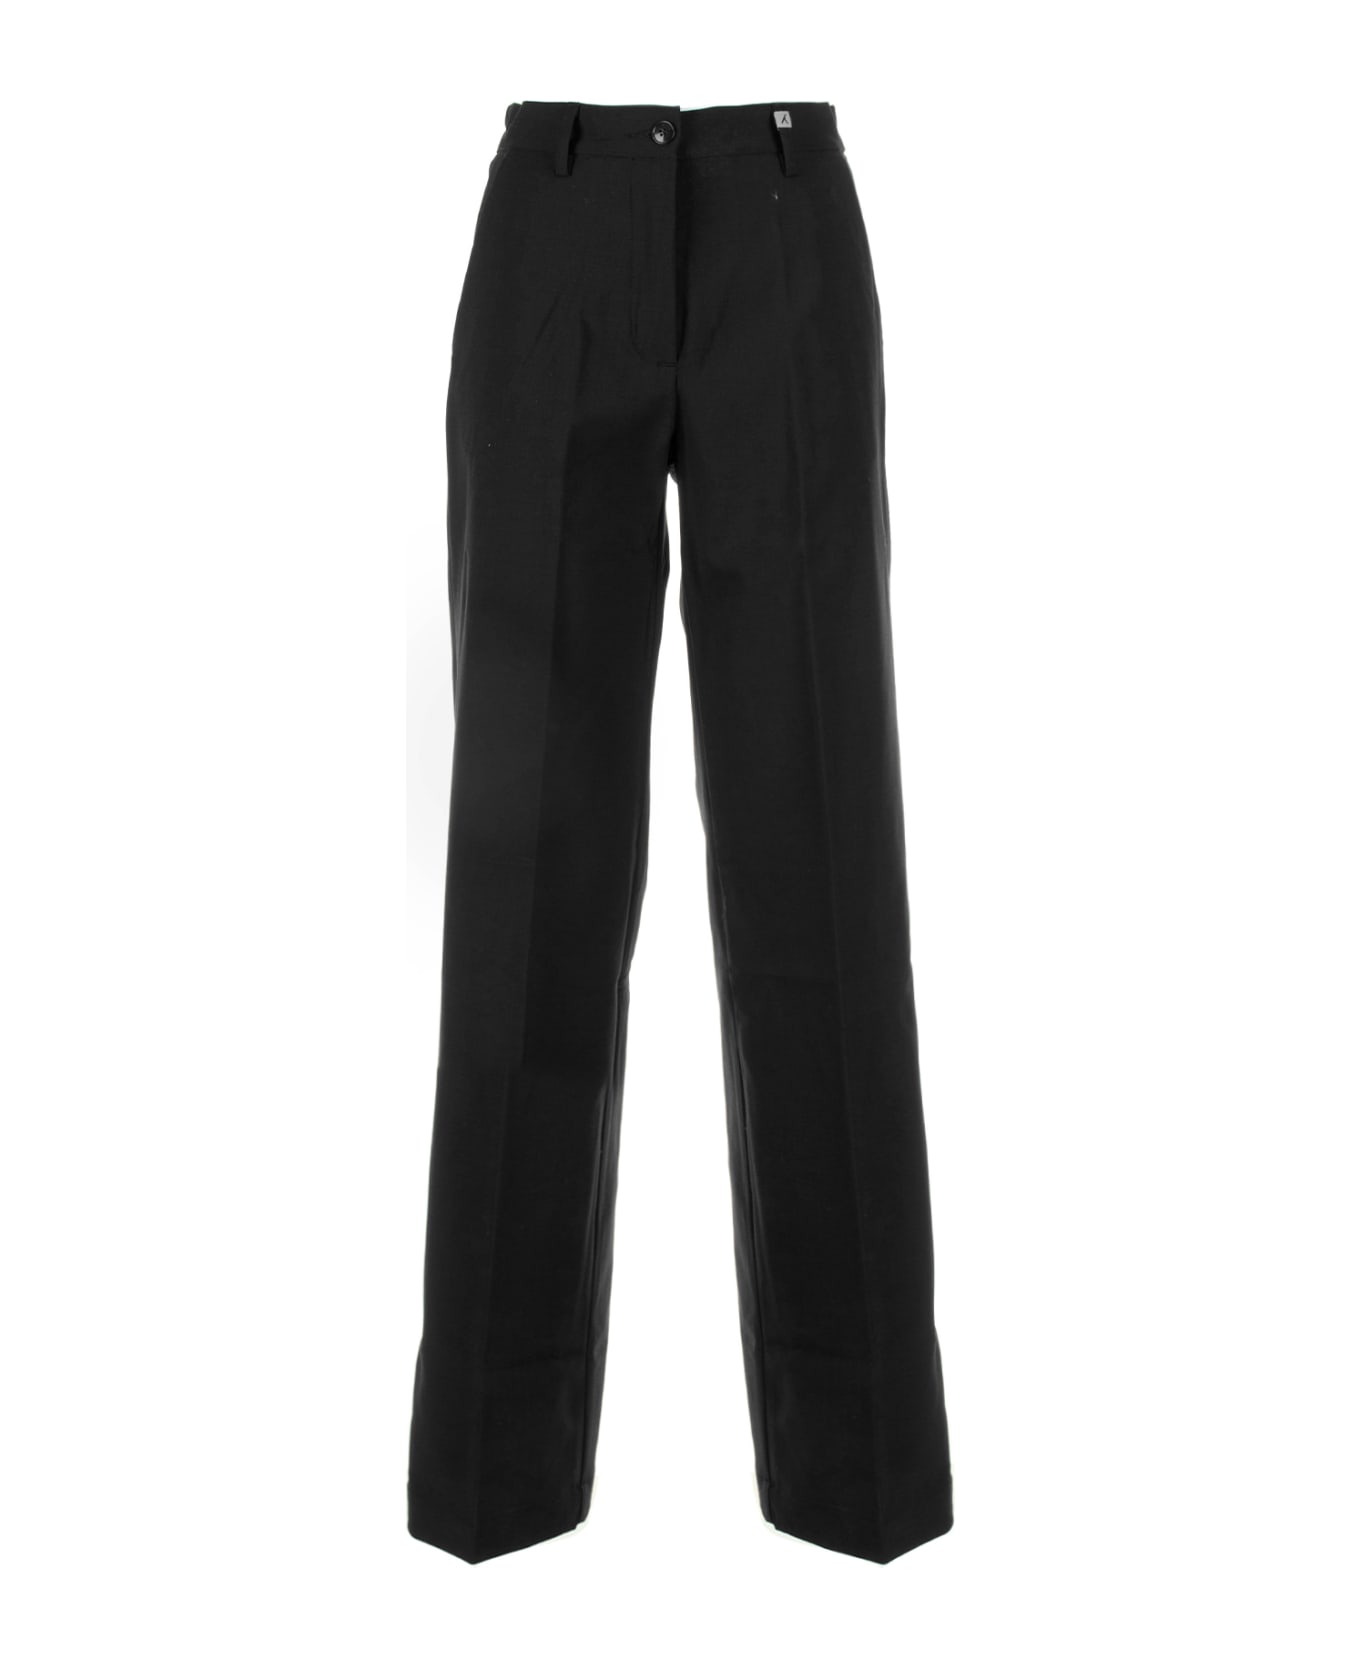 Myths Black High-waisted Trousers - NERO